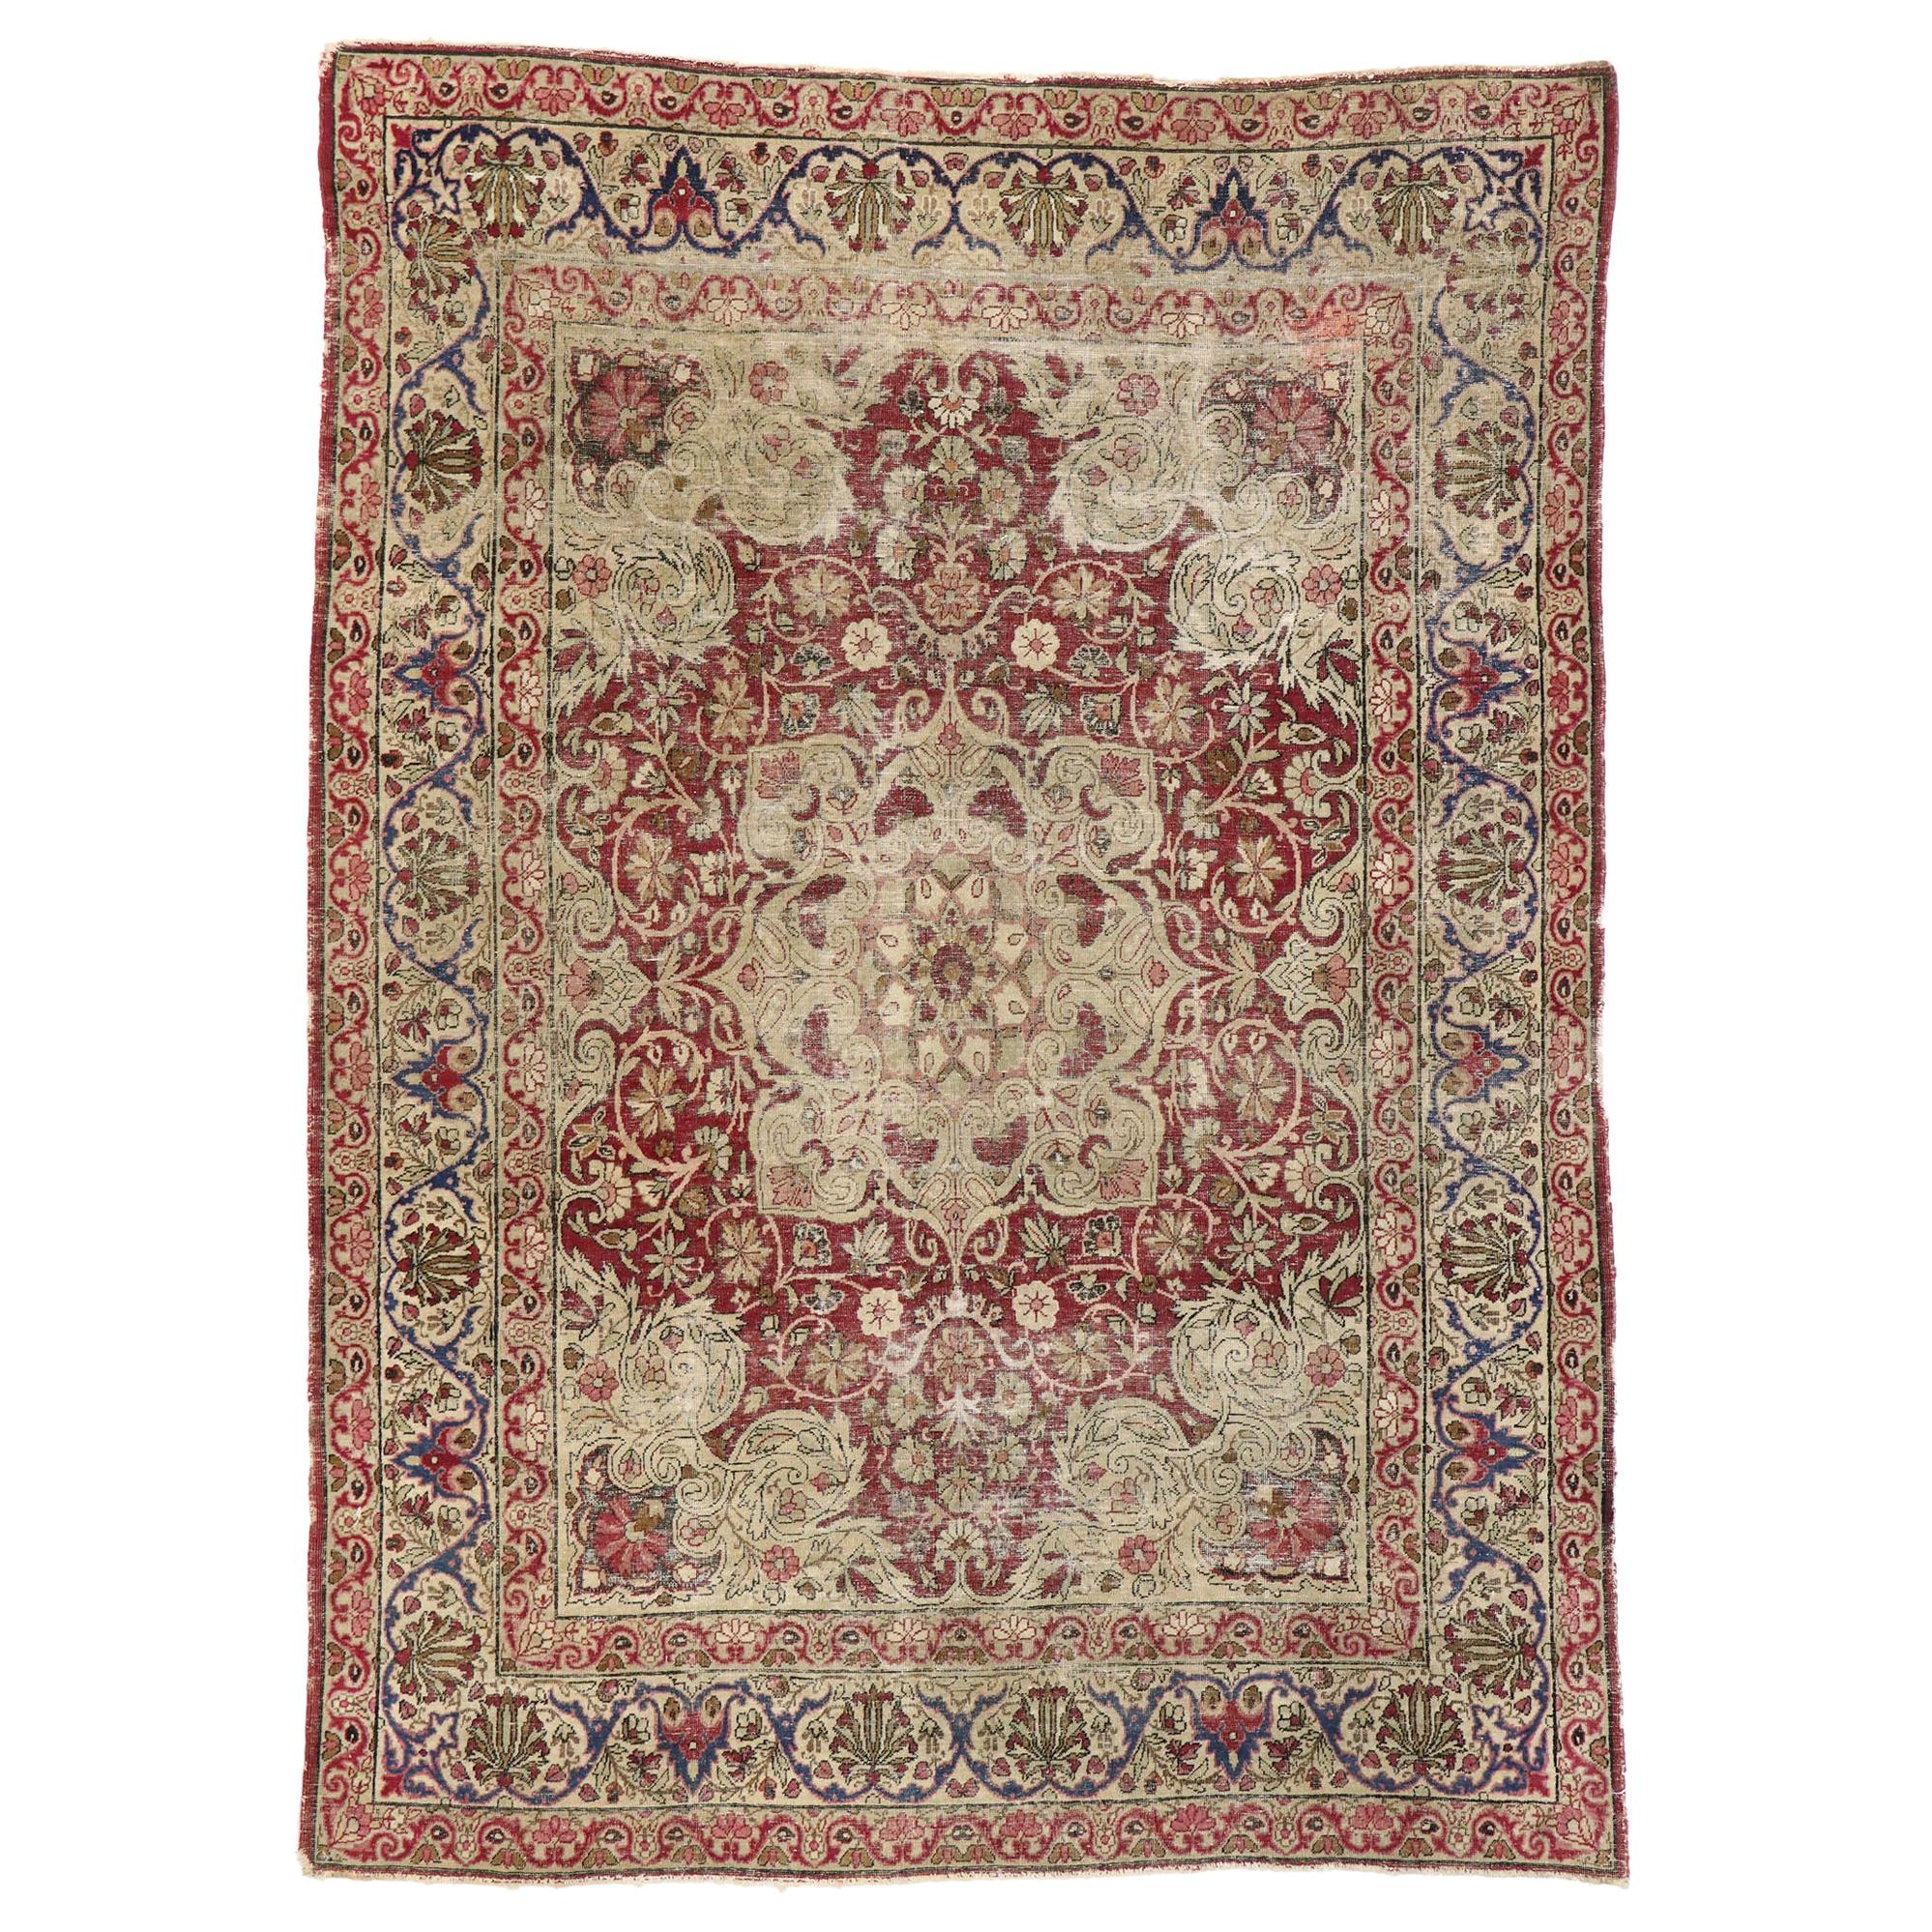 Distressed Antique Persian Kerman Rug with Rustic Old World Victorian Style For Sale